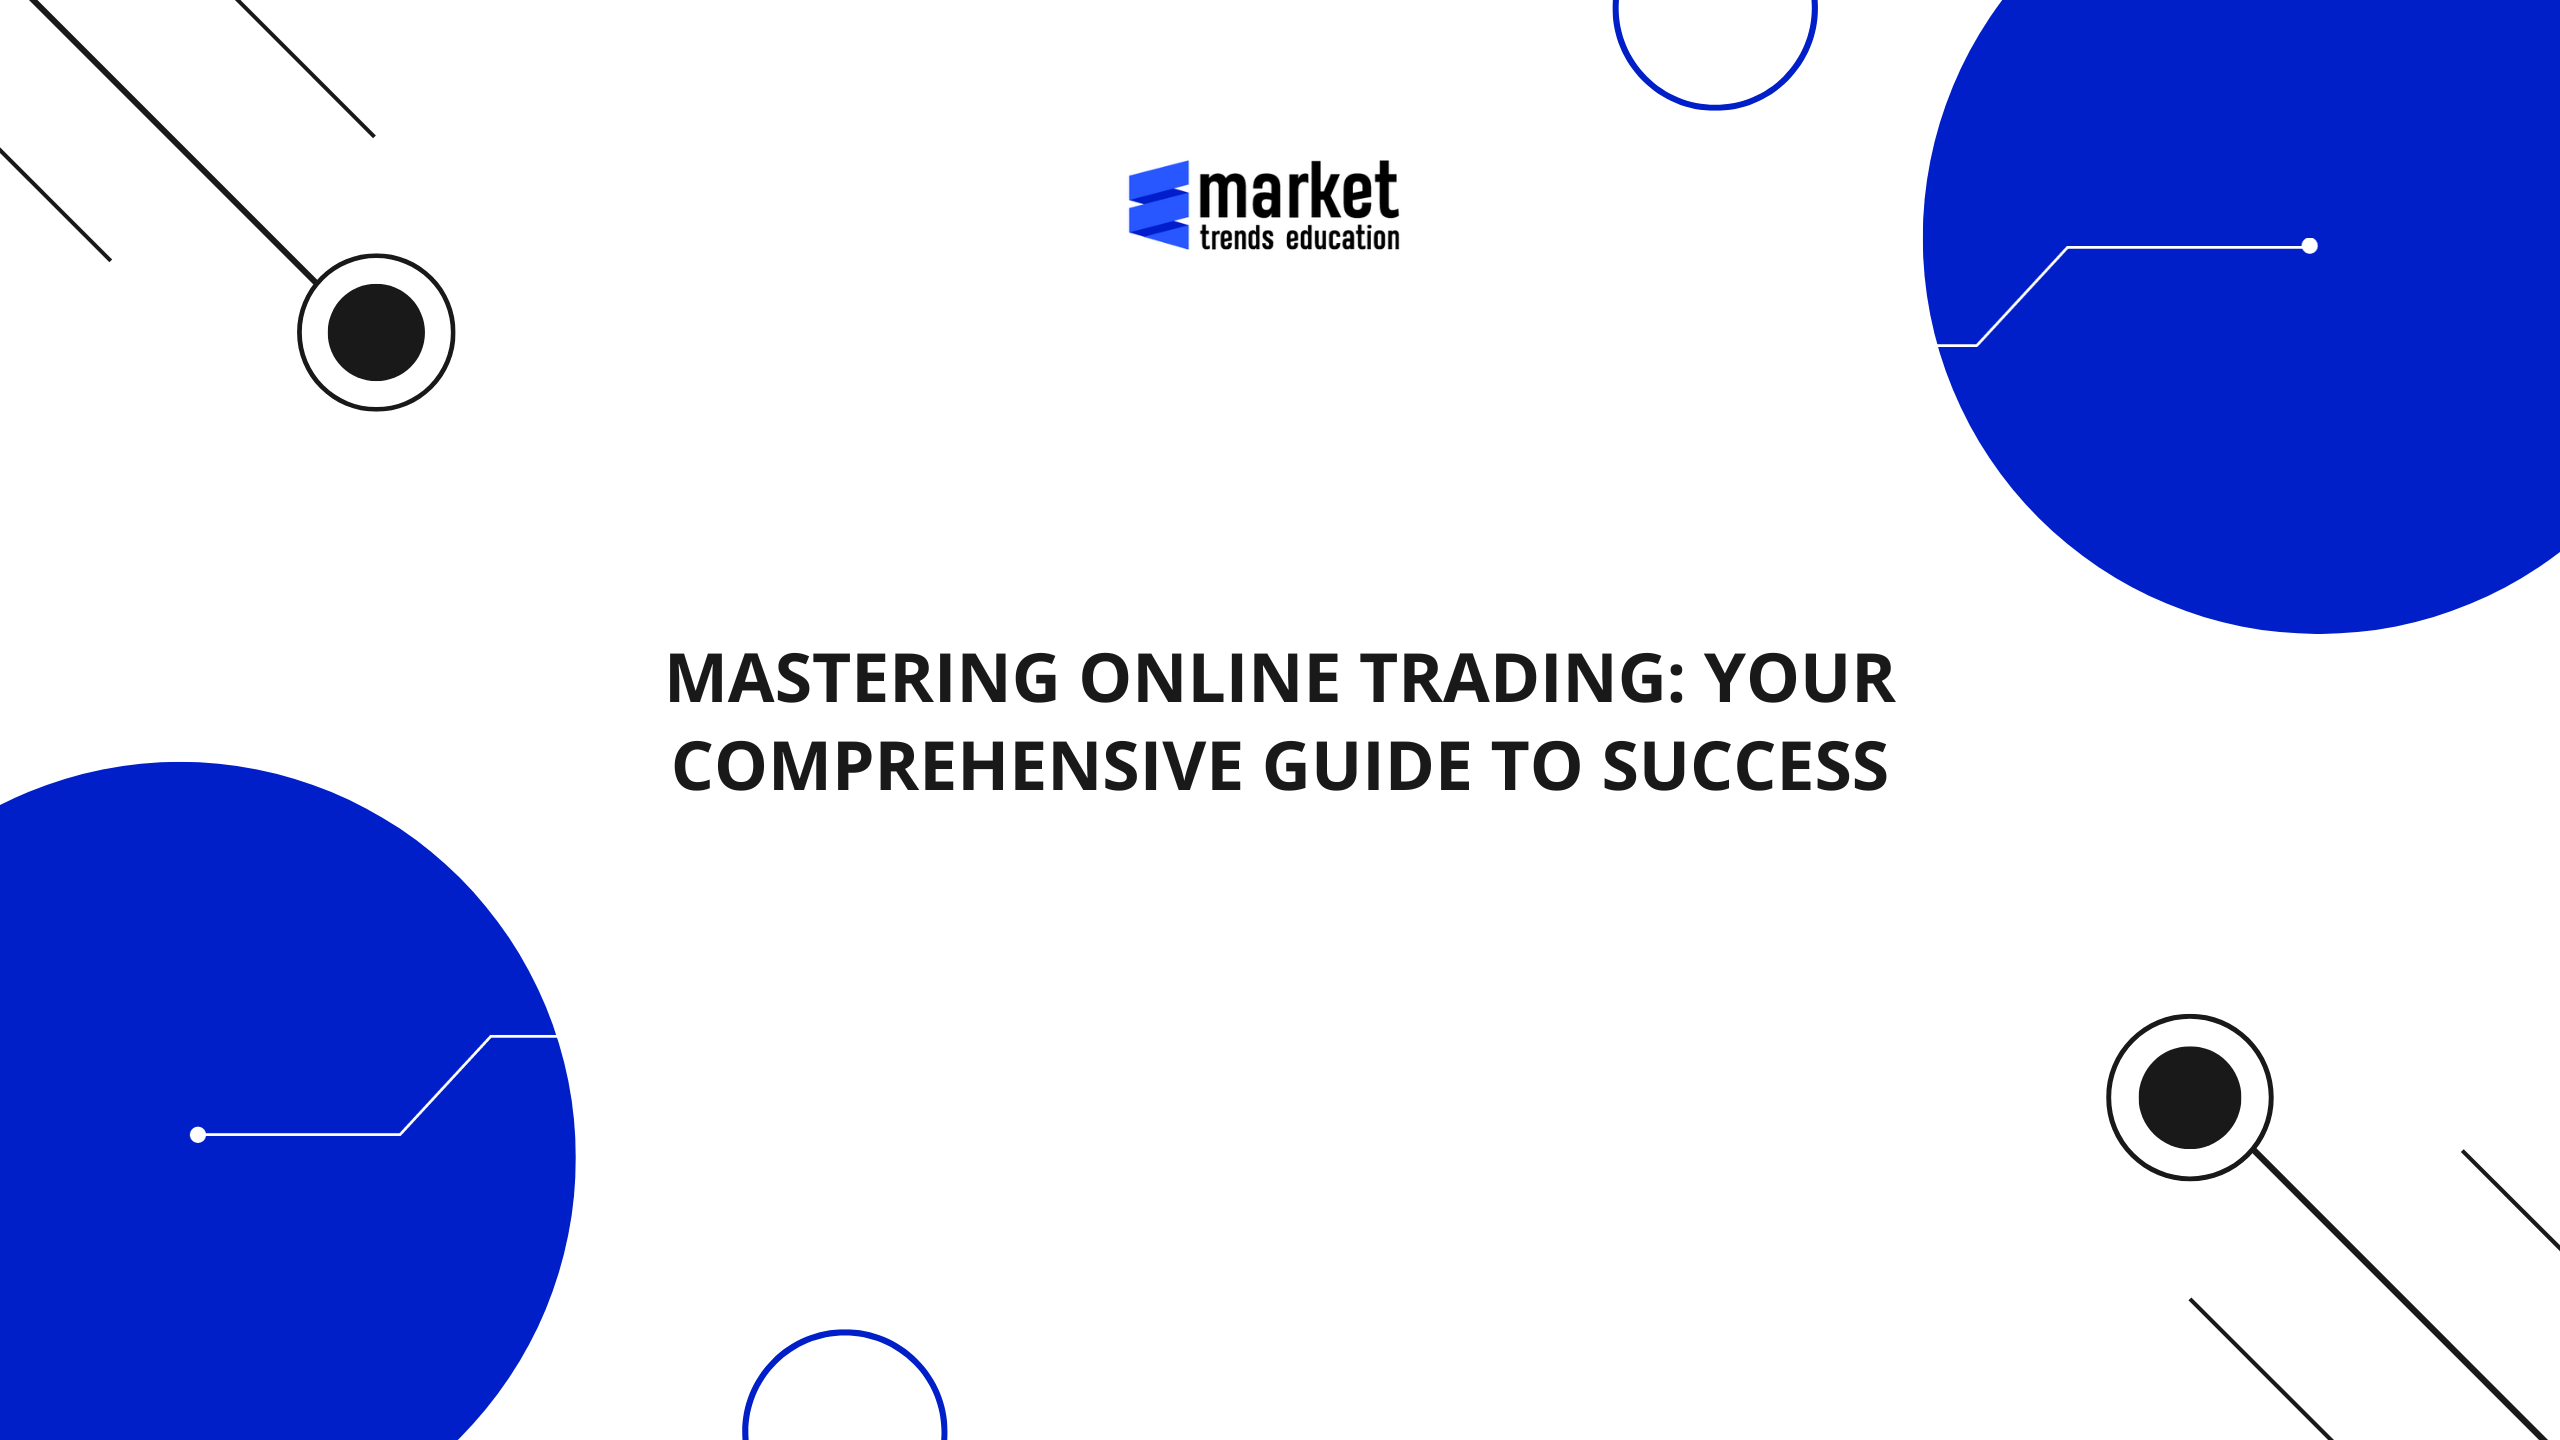 Mastering Online Trading: Your Comprehensive Guide to Success